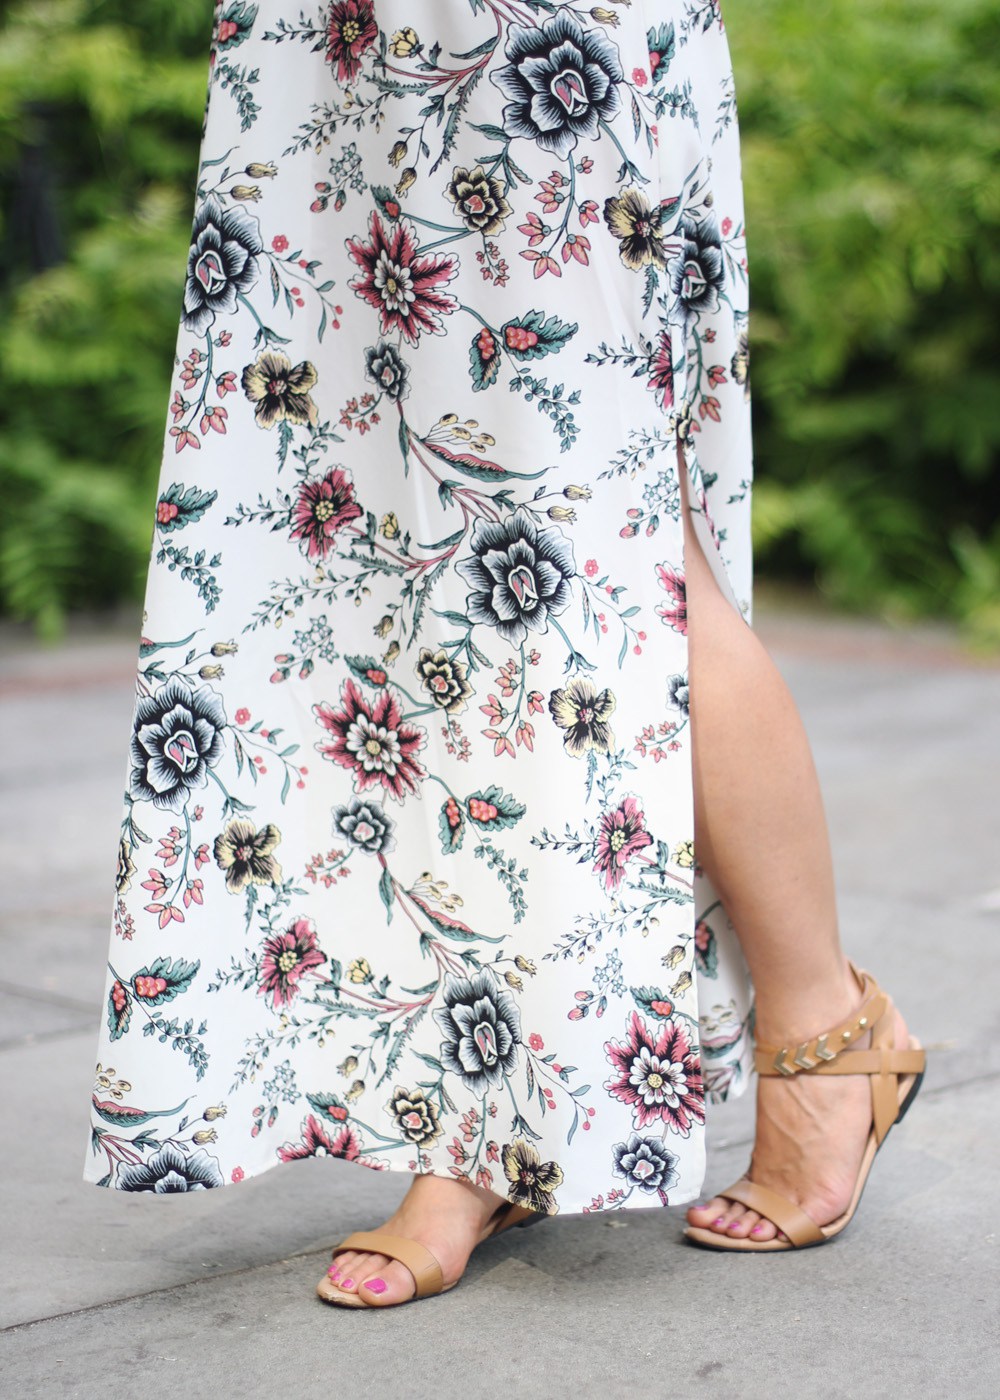 Skirt-The-Rules-White-Floral-Maxi-8.jpg